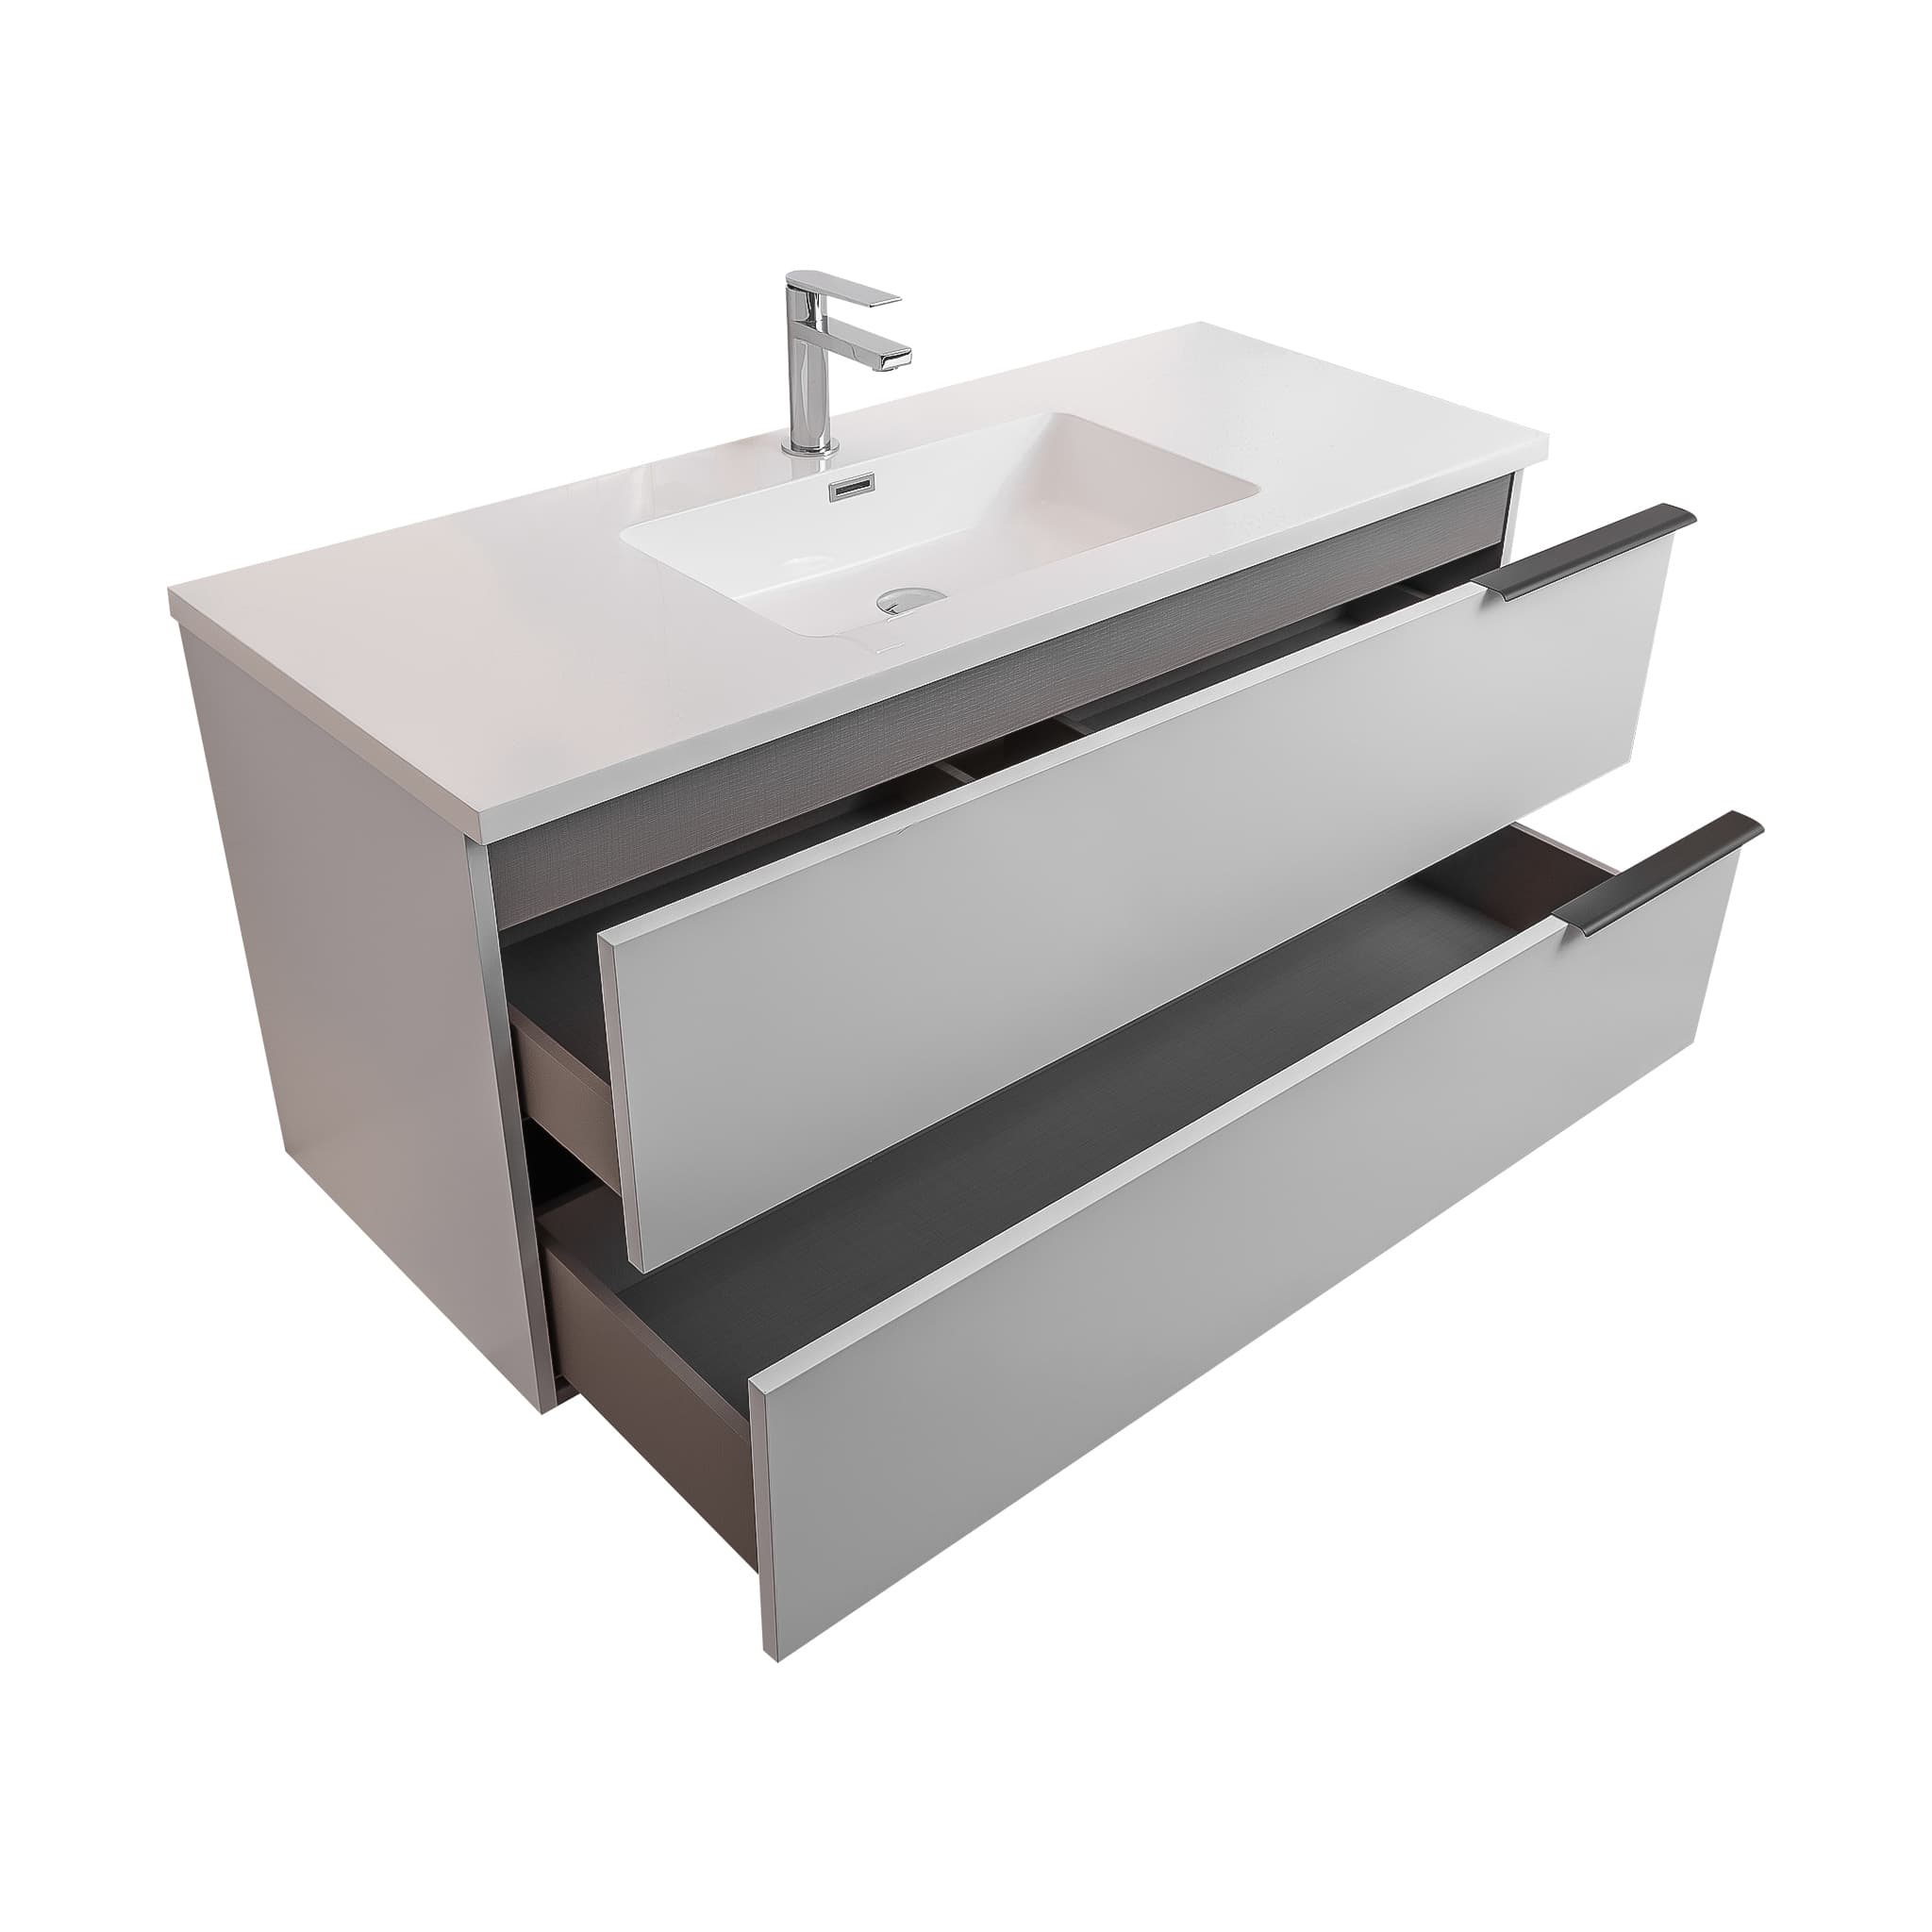 Mallorca 47.5 Matte White Cabinet, Square Cultured Marble Sink, Wall Mounted Modern Vanity Set